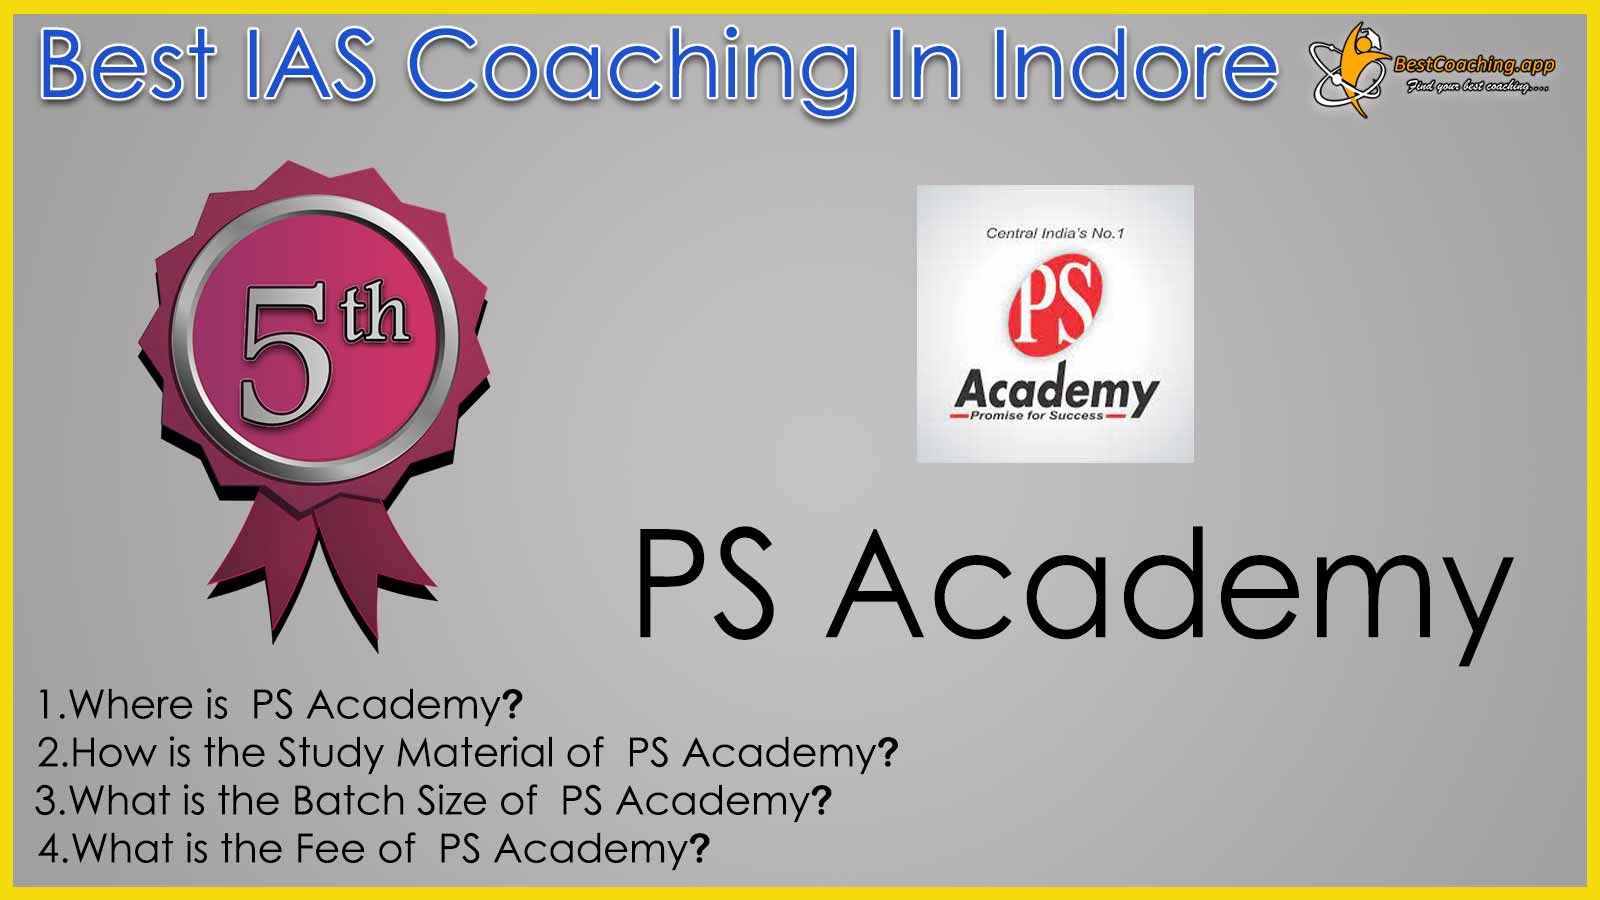 PS Academy IAS Coaching in Indore